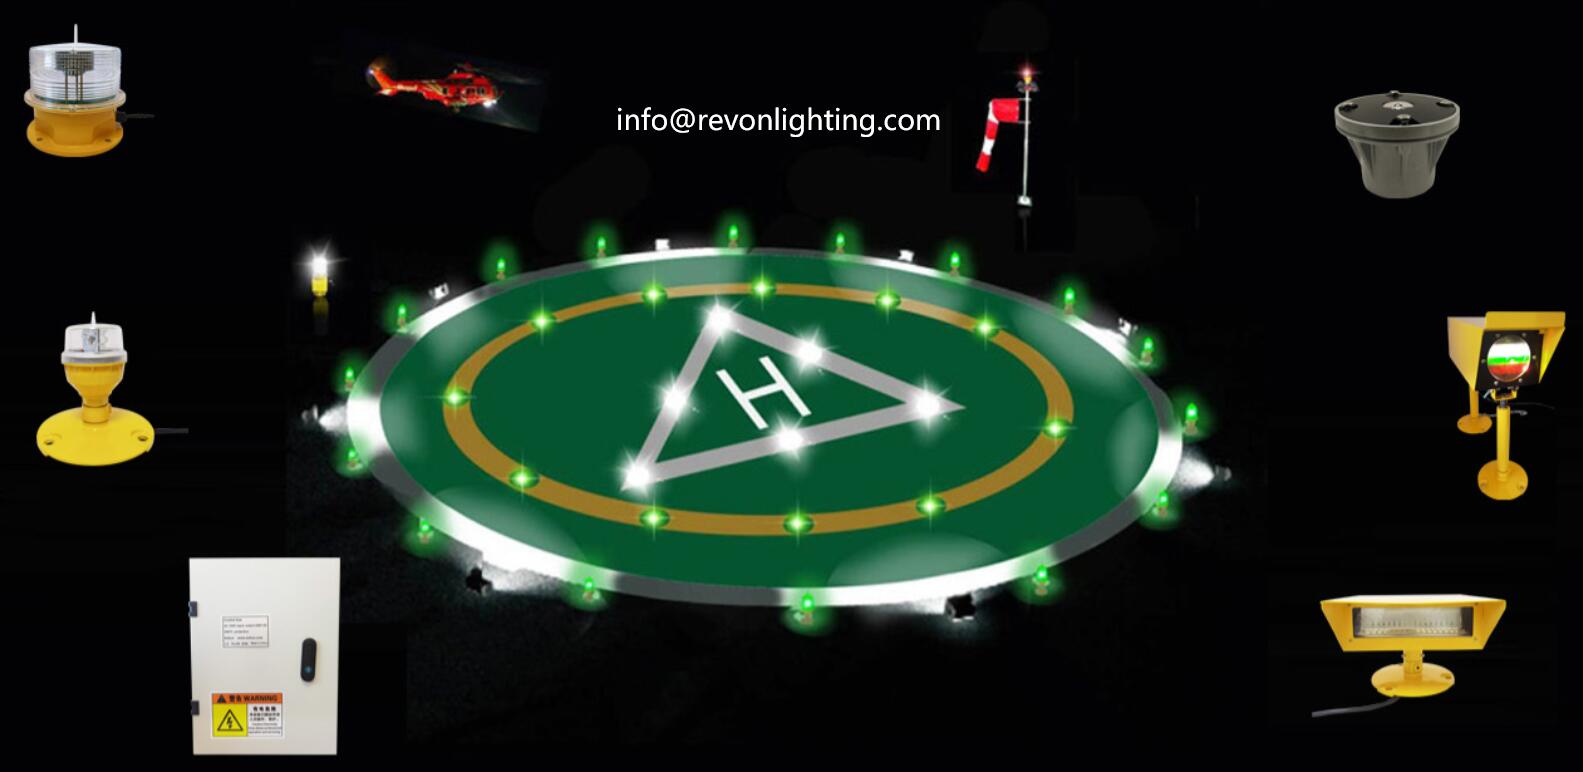 Helipad Lighting Suppliers: Illuminating Safe and Efficient Airborne Operations